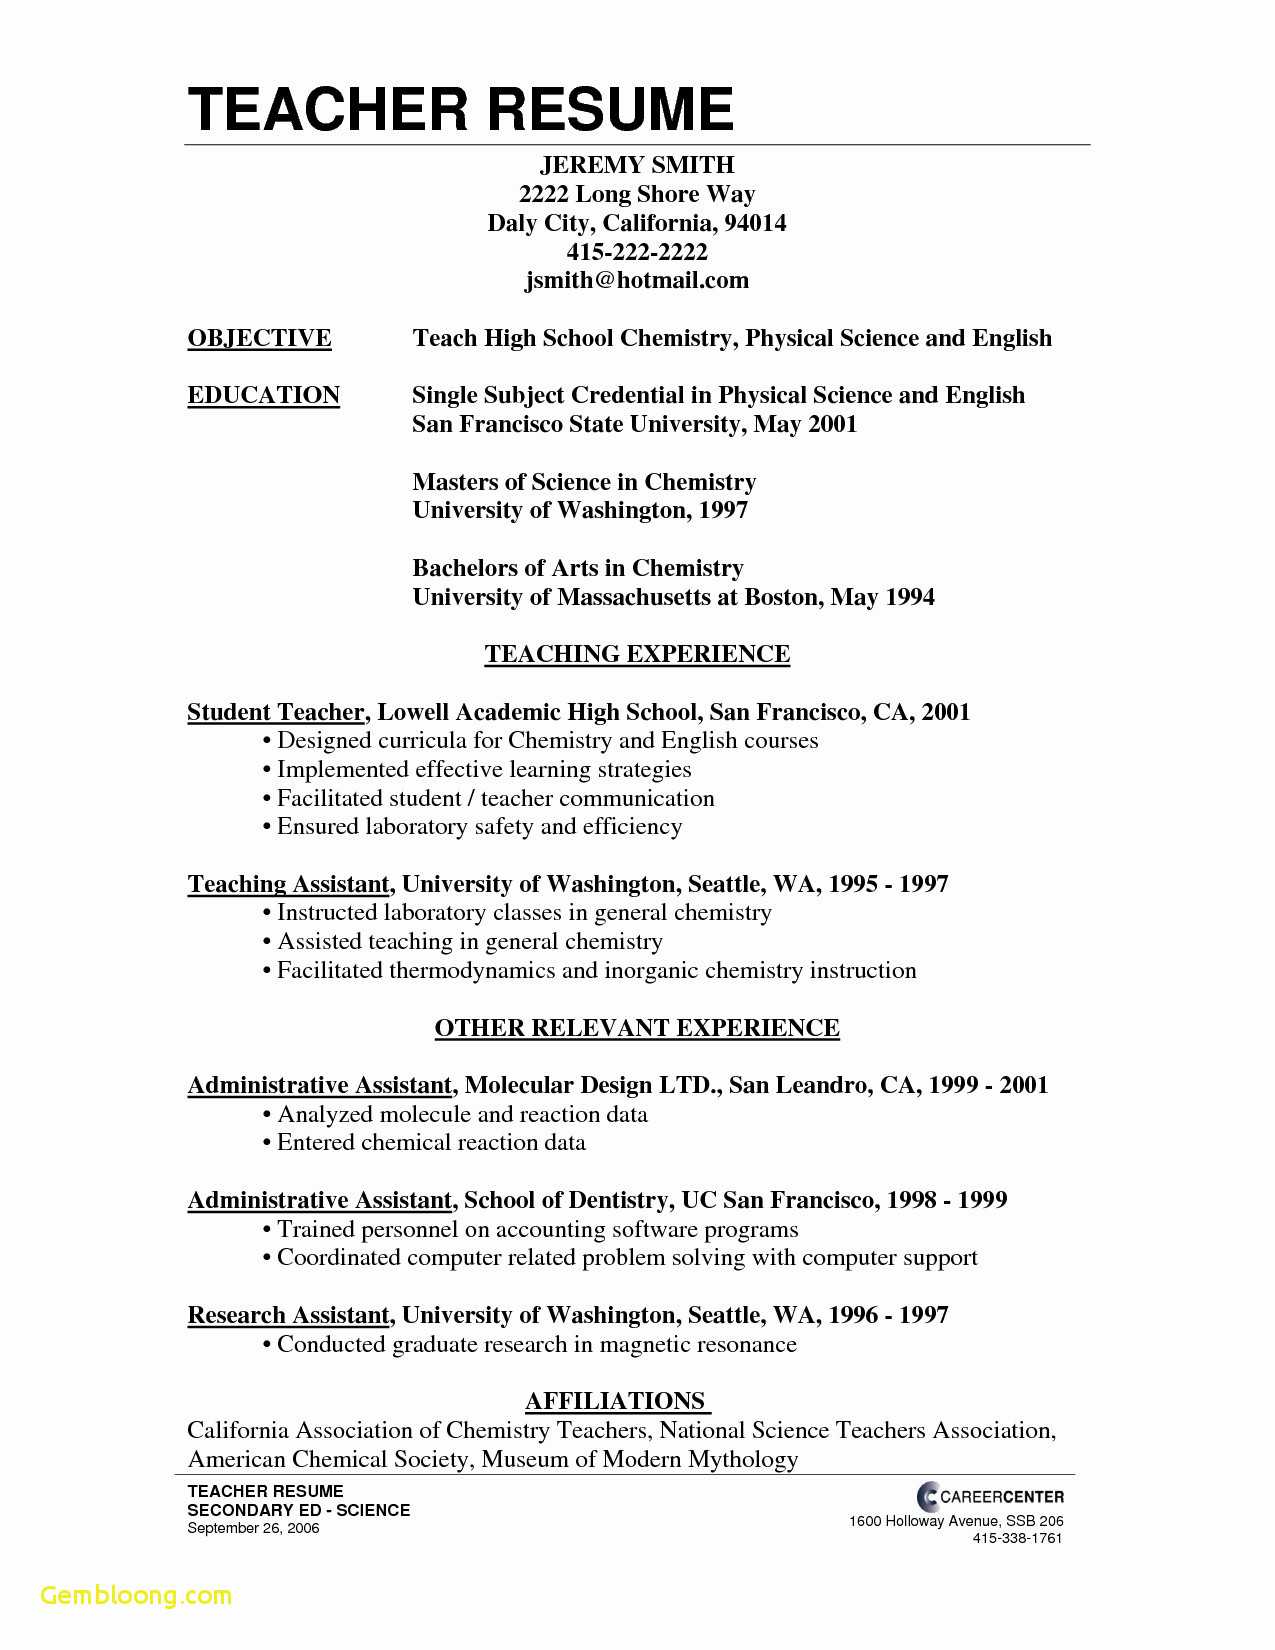 Fill In the Blank Resume Worksheet or 23 Cover Sheet Template for Resume Free Sample Resume